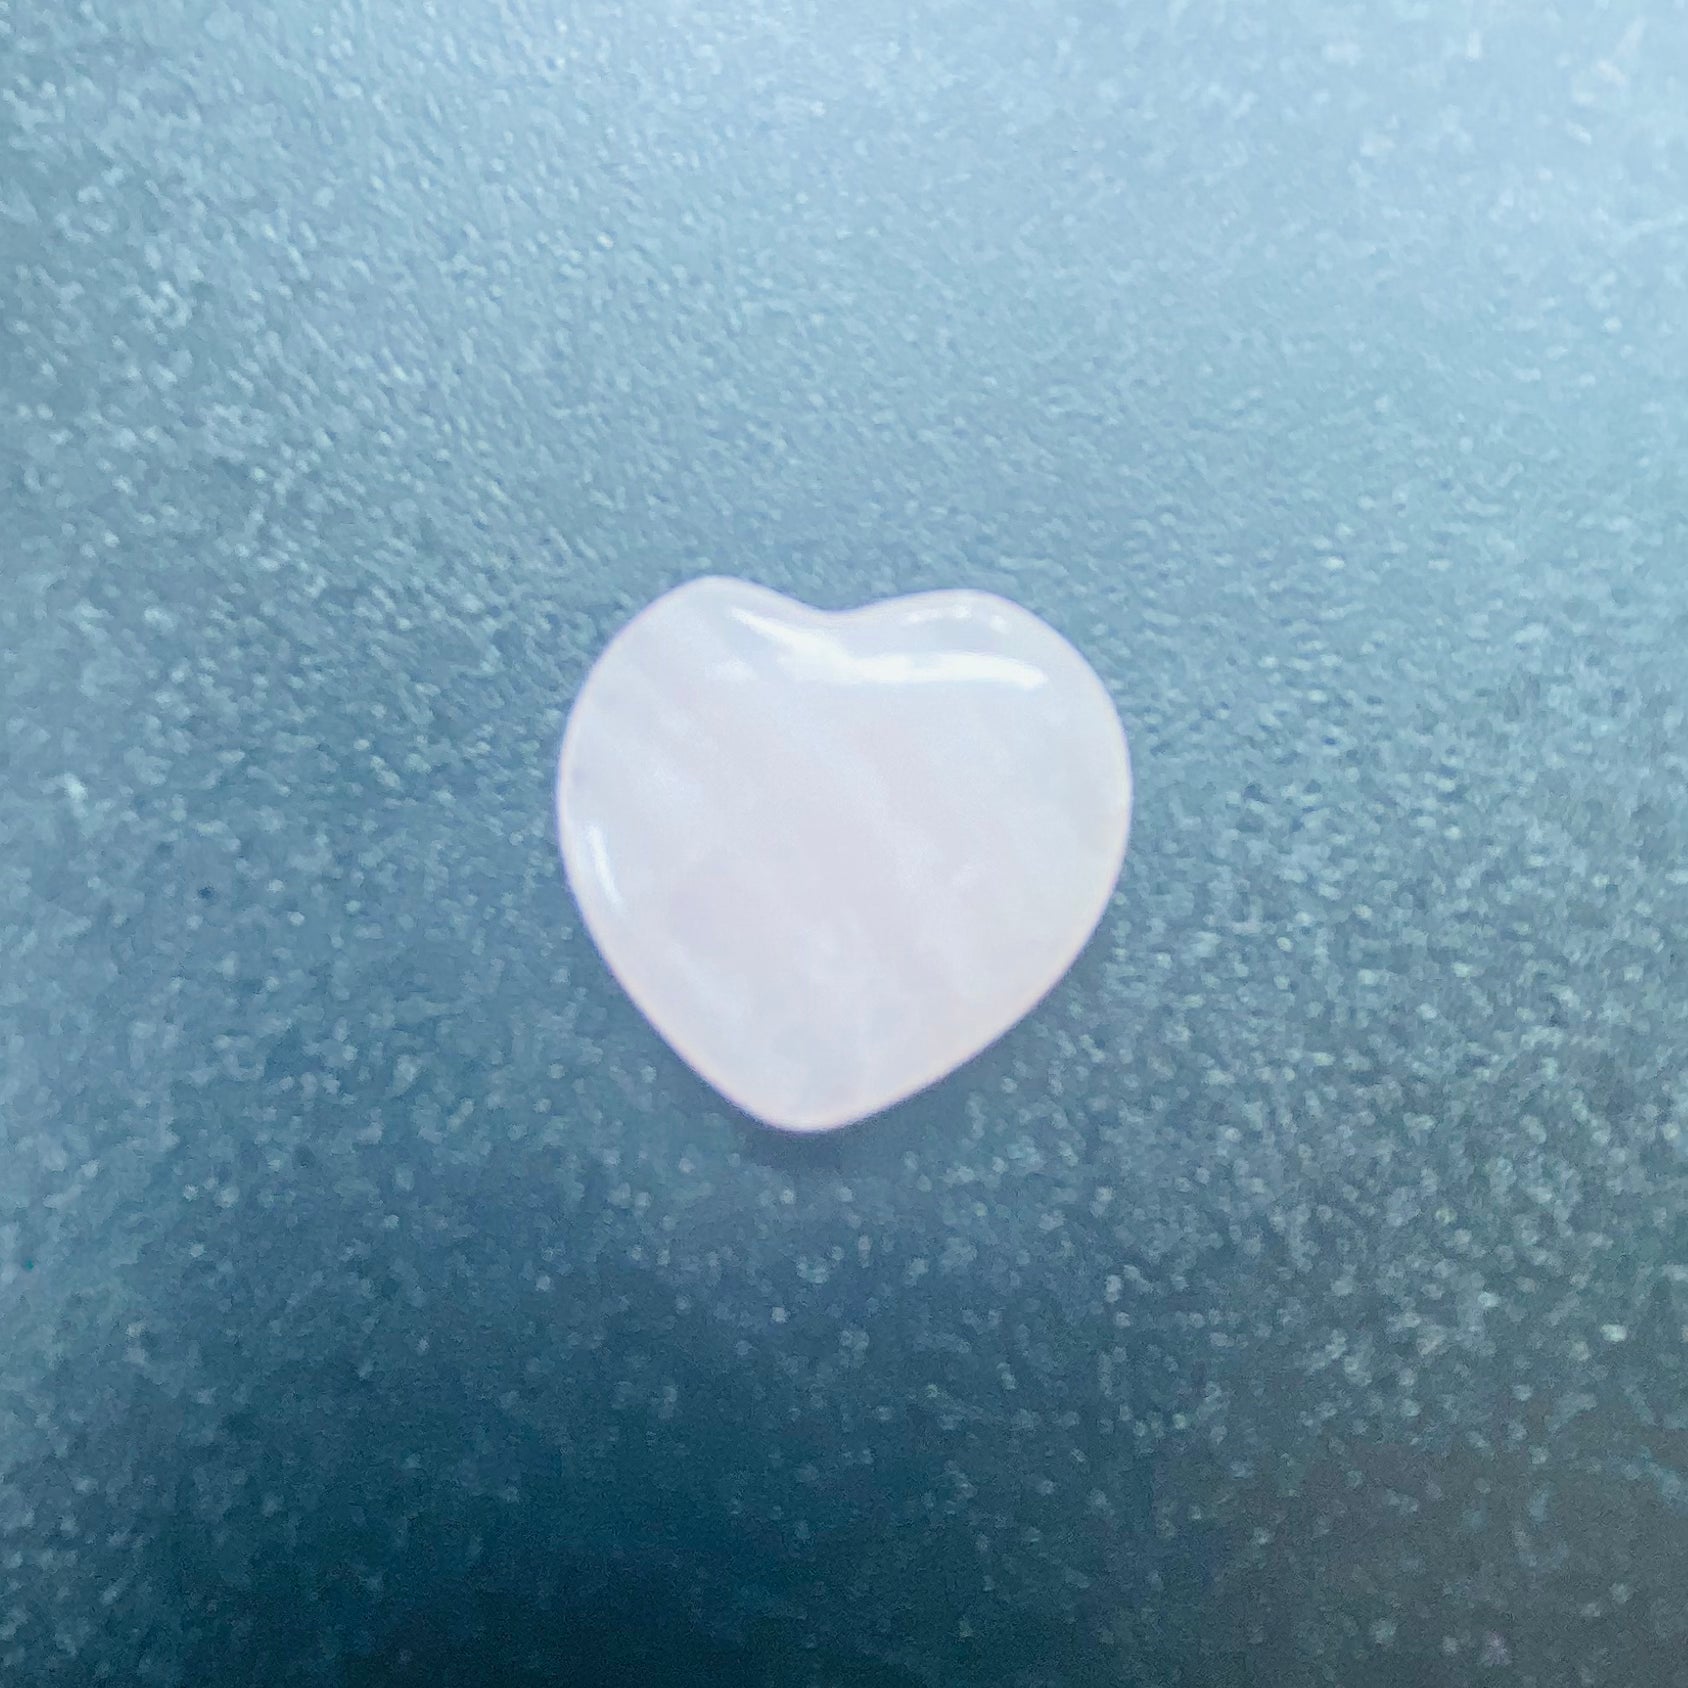 Rose Quartz Heart Small at $5 only from Spiral Rain